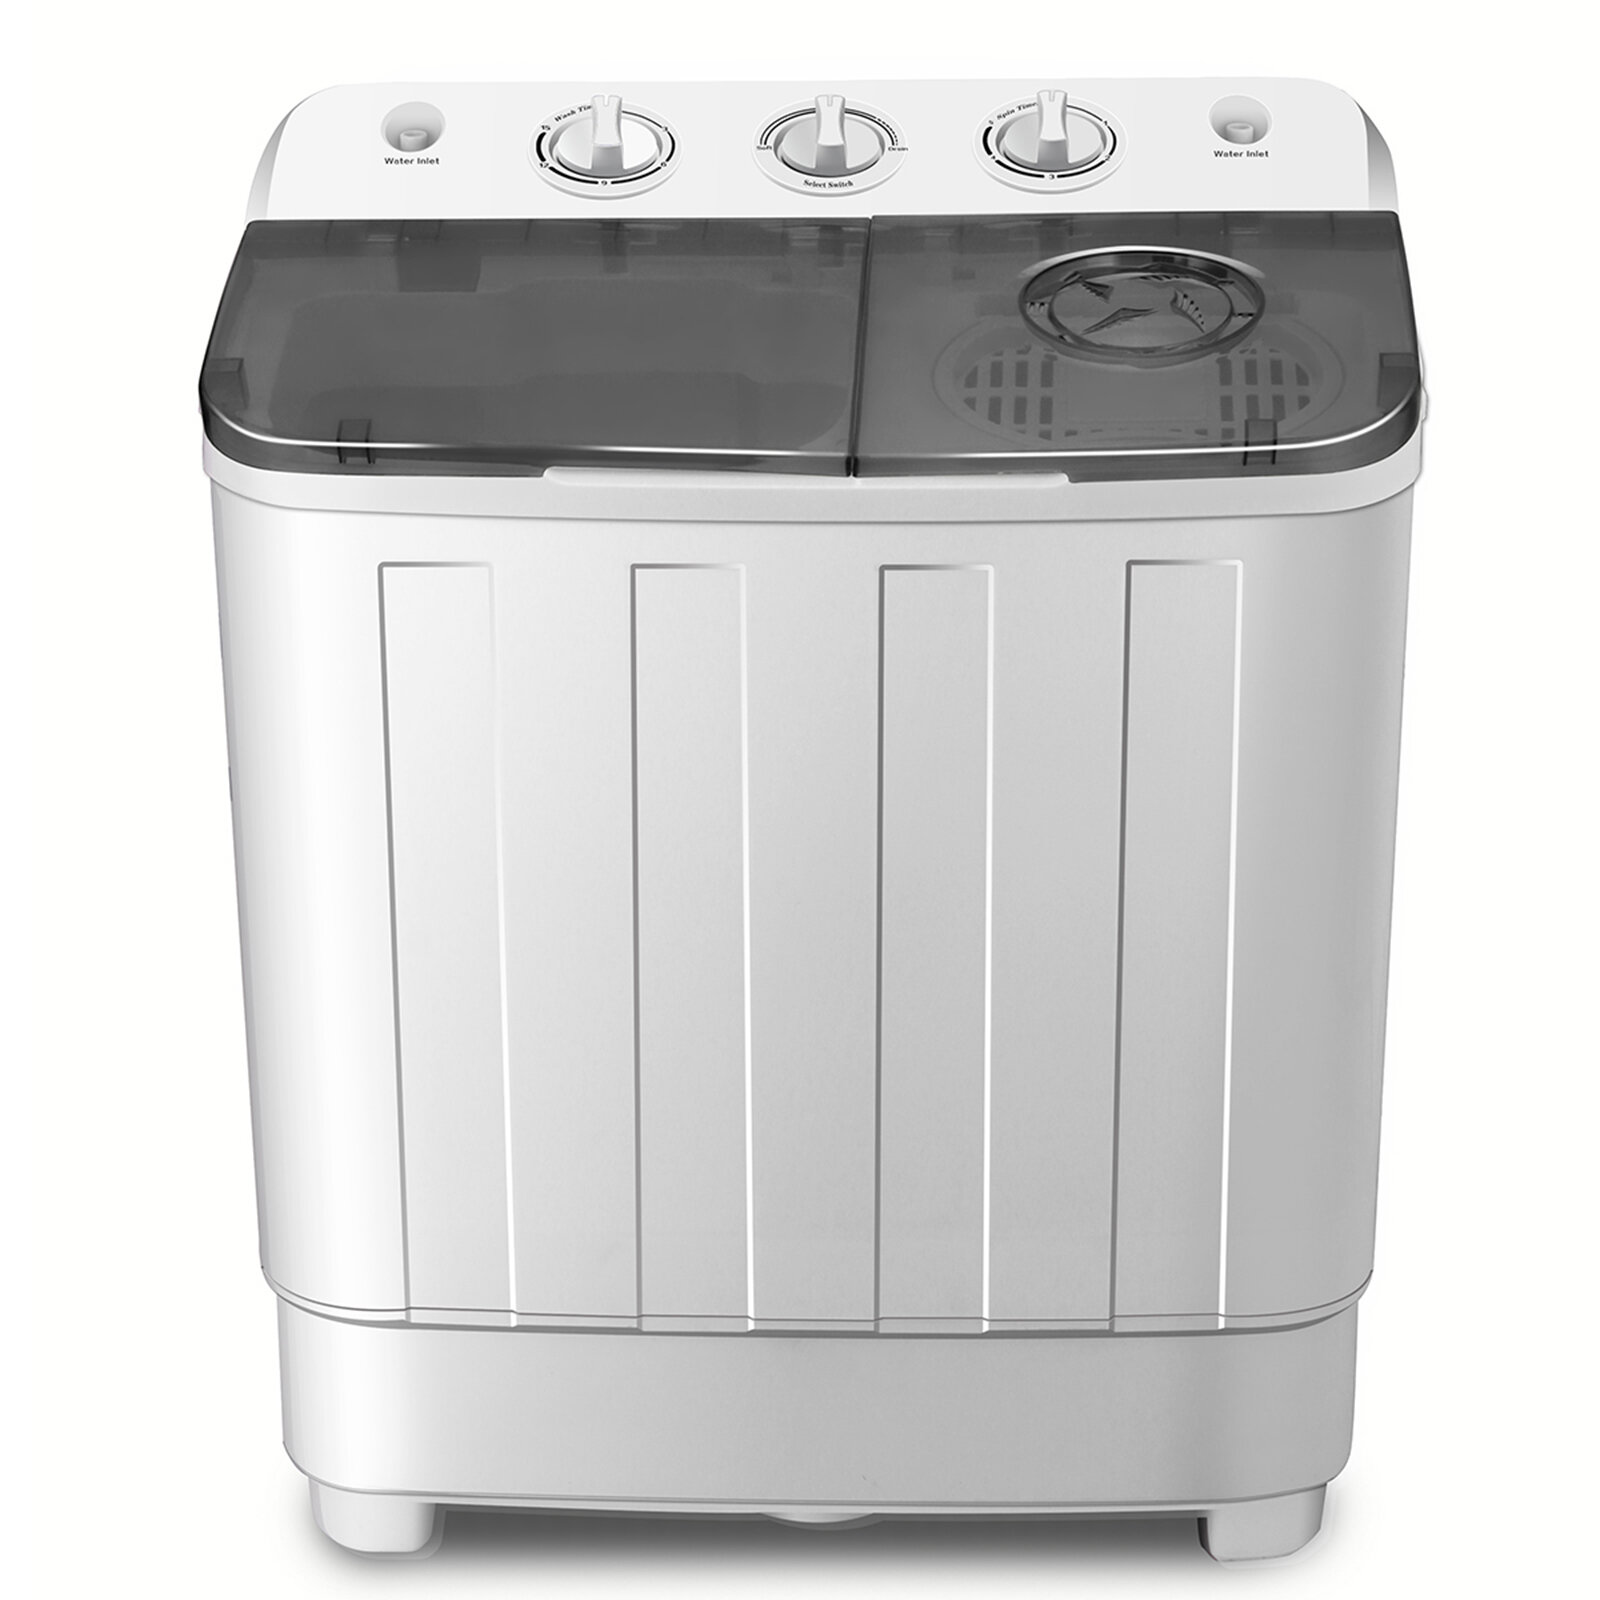 Panda 3200 RPM Ultra Fast Portable Spin Dryer Stainless Steel, 110-Volt / Capacity 0.6 Cu. ft., Silver